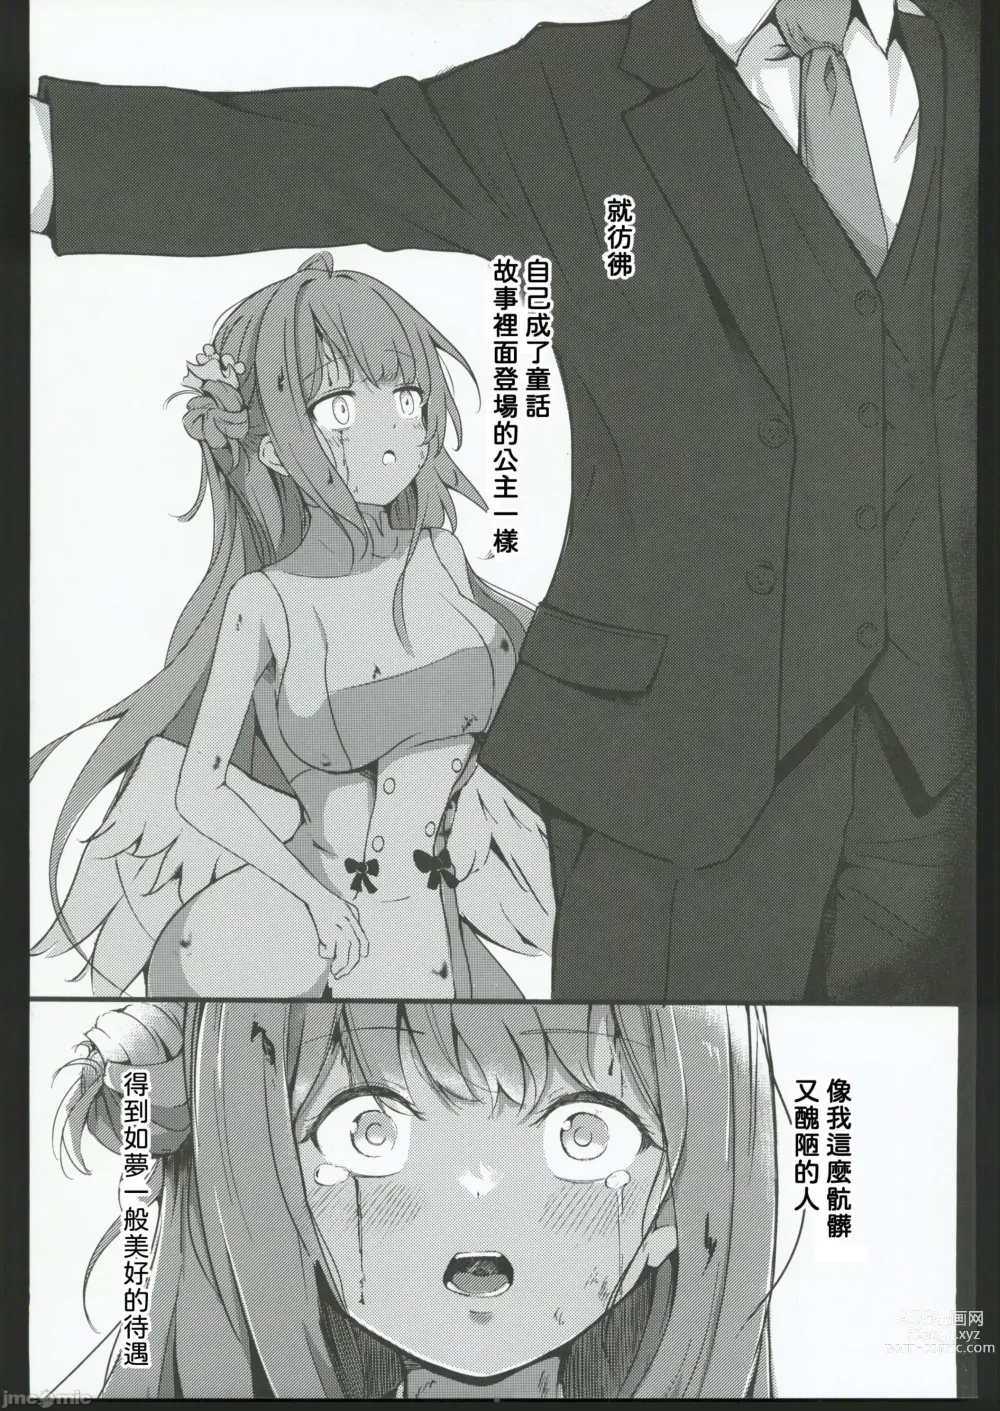 Page 4 of doujinshi Blanc Aile to Otogibanashi - The treaty lost, but hope remains.